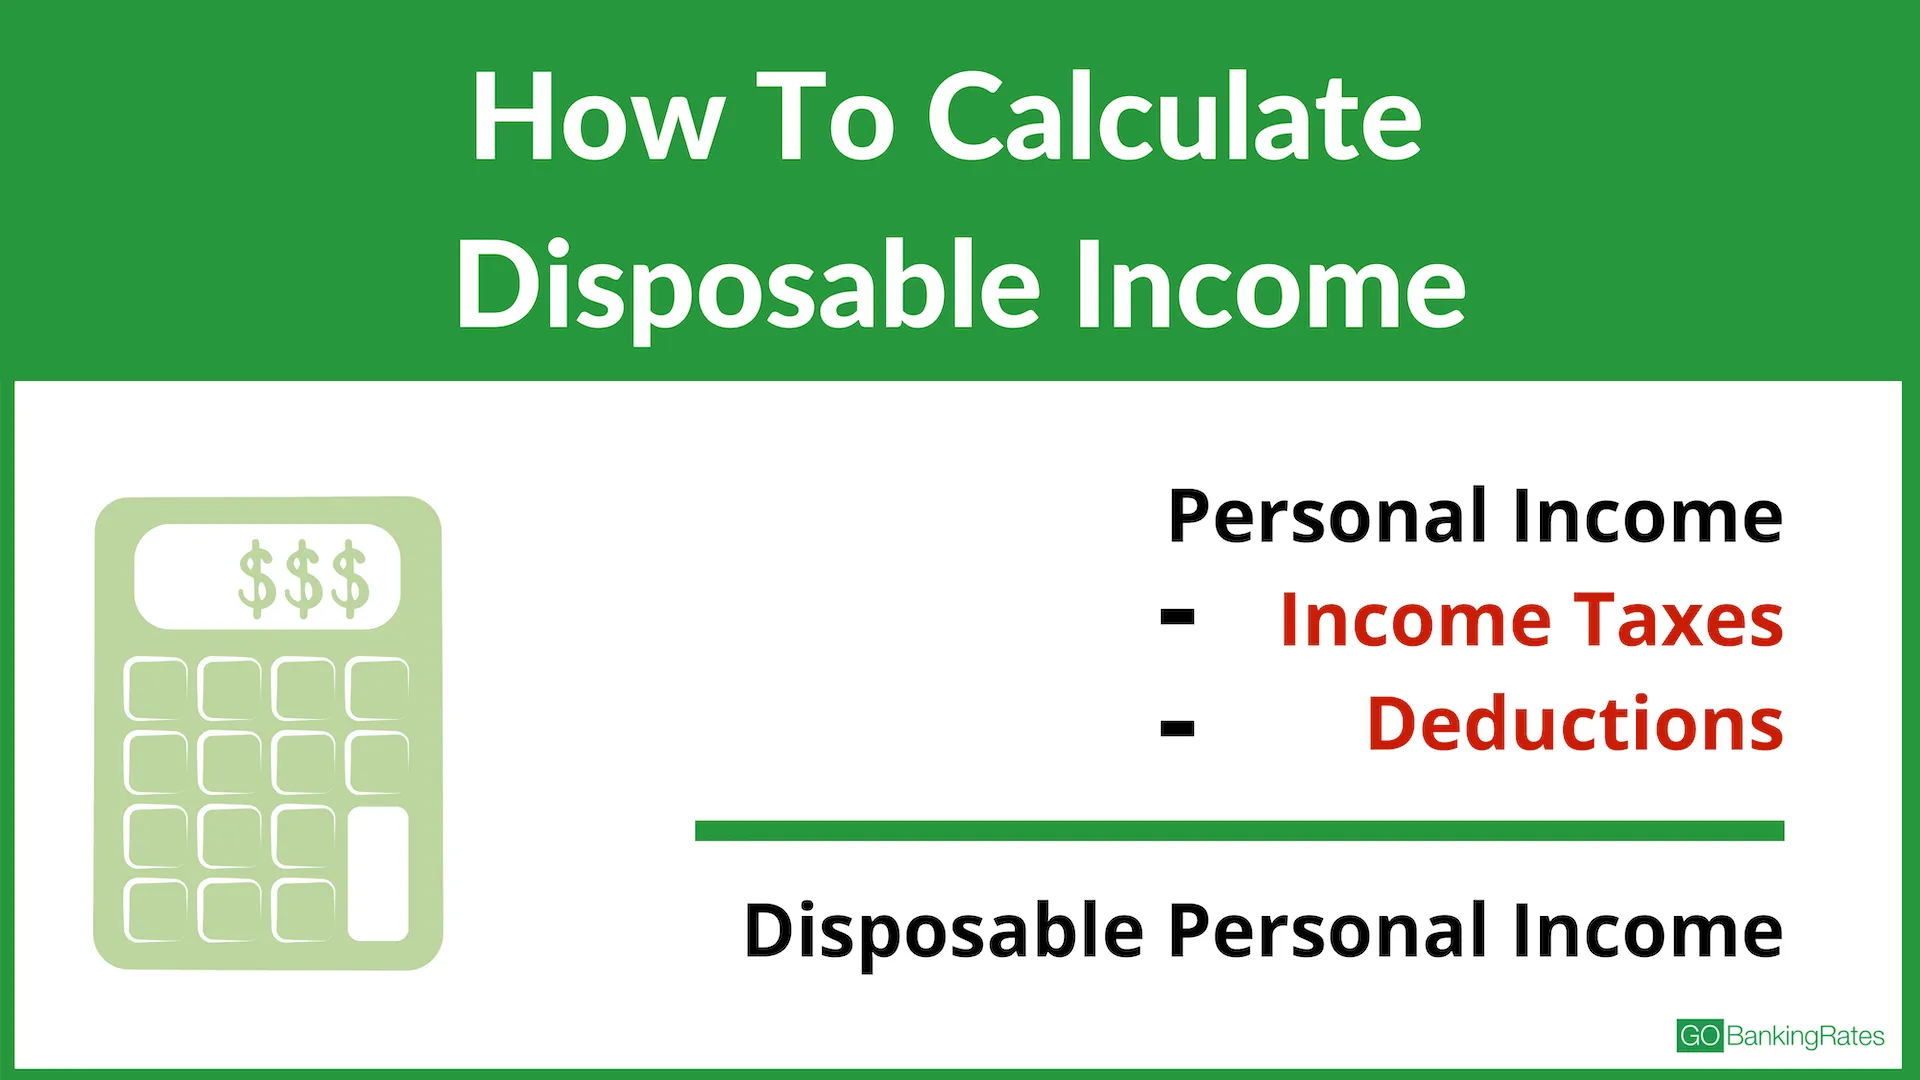 the formula for calculating disposable income is personal income minus income taxes and deductions